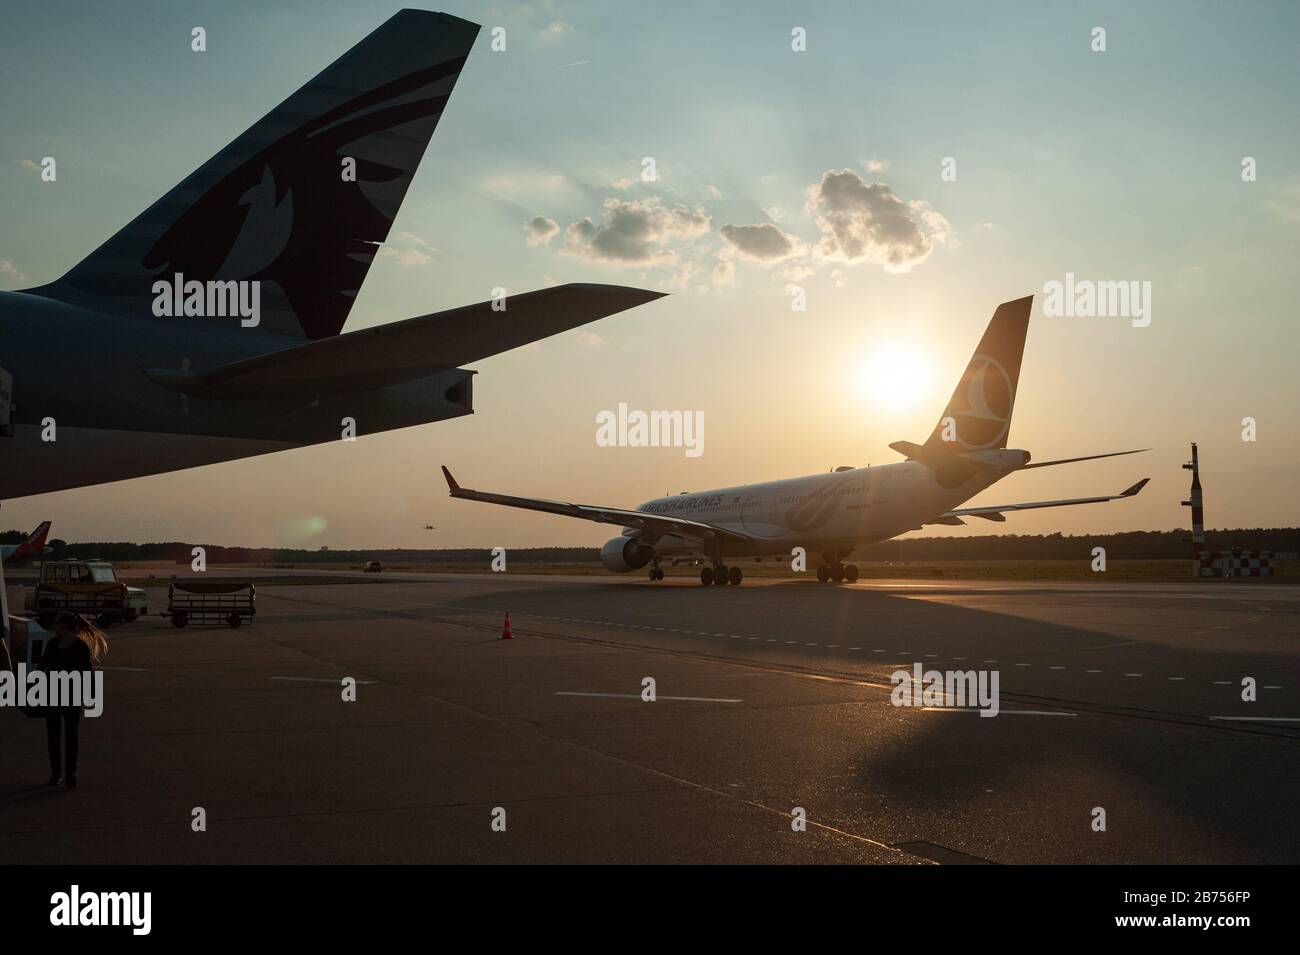 05.06.2019, Berlin, Germany, Europe - Passenger planes at Berlin Tegel Airport in the evening twilight. [automated translation] Stock Photo